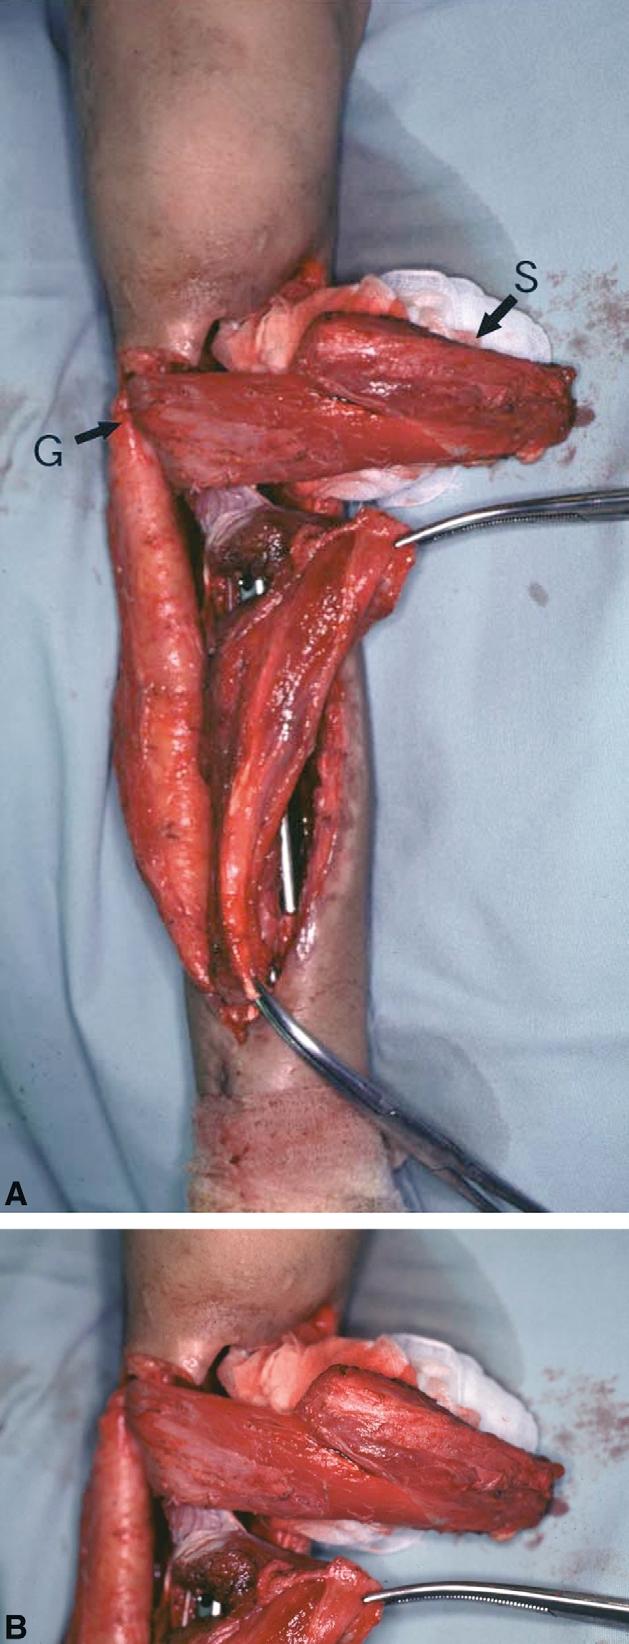 80 I. Hyodo et al. adjuvant chemotherapy postoperatively. In the first operation wide resection of the tumour was performed and the proximal anterior tibial artery and vein was resected.